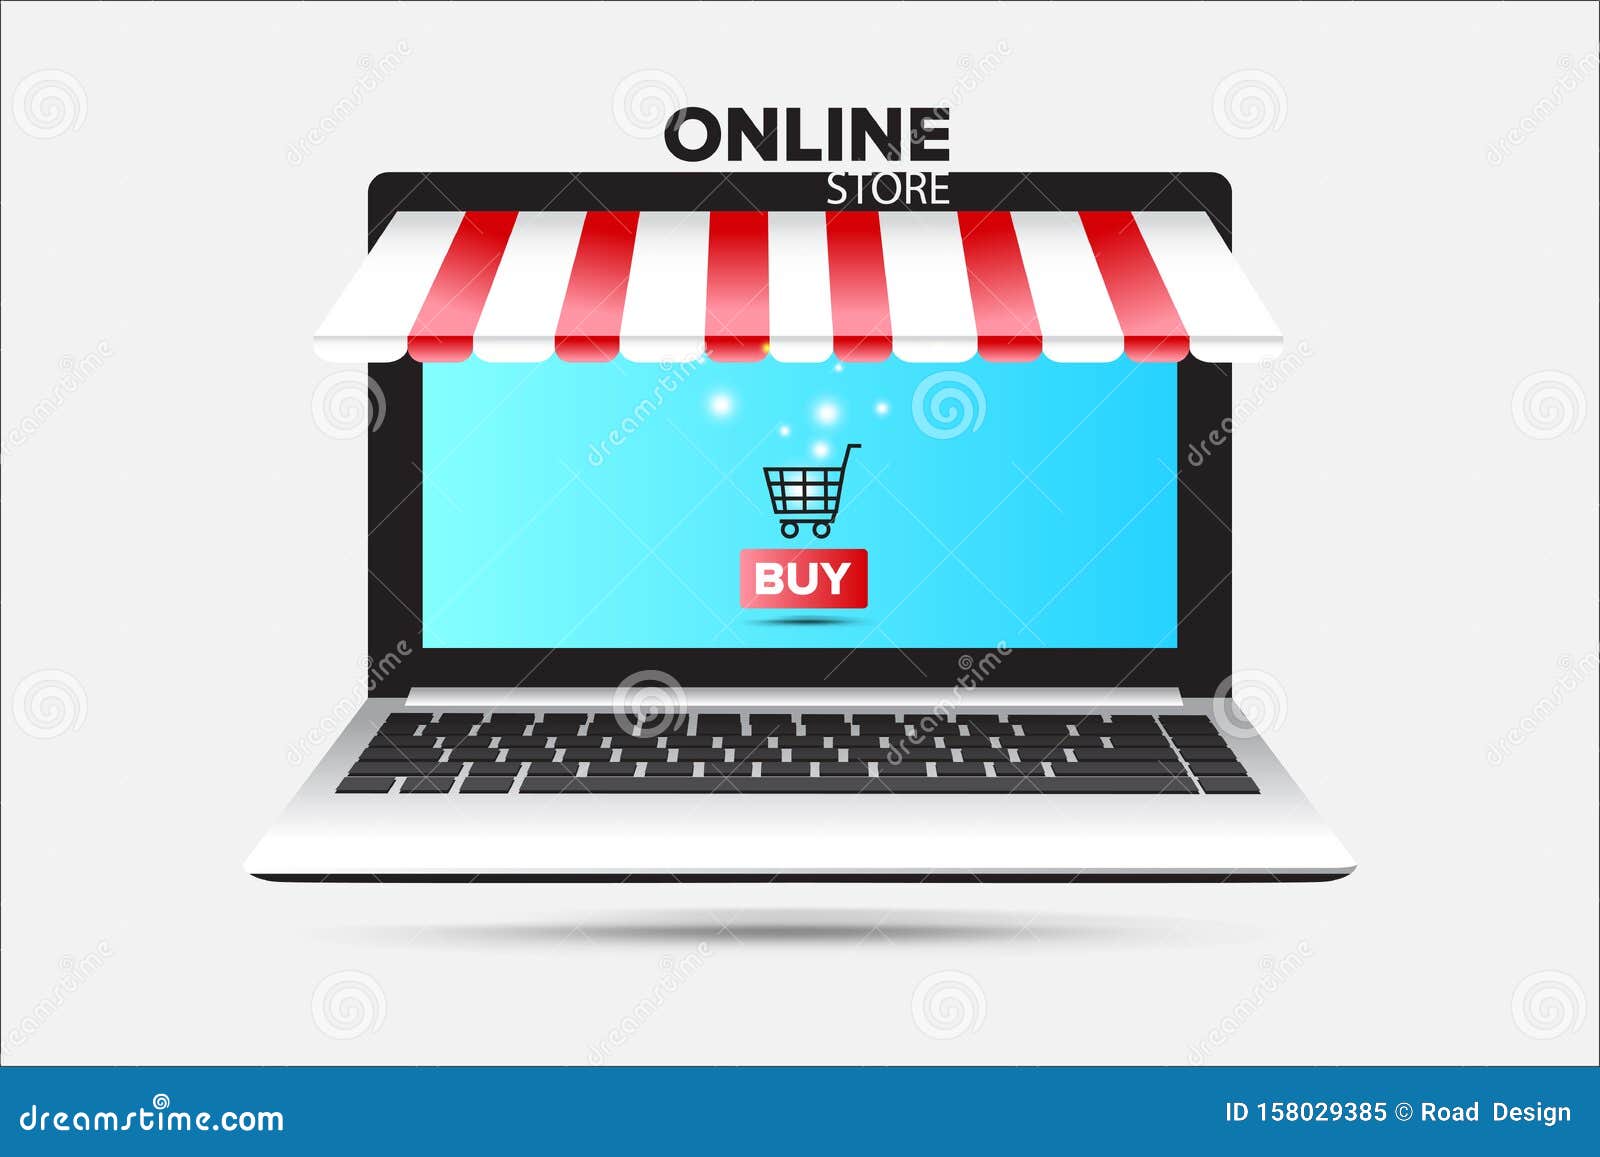 nul moe Aanleg Online Shopping with Open Laptop. Online Store Concept Stock Vector -  Illustration of market, electronic: 158029385